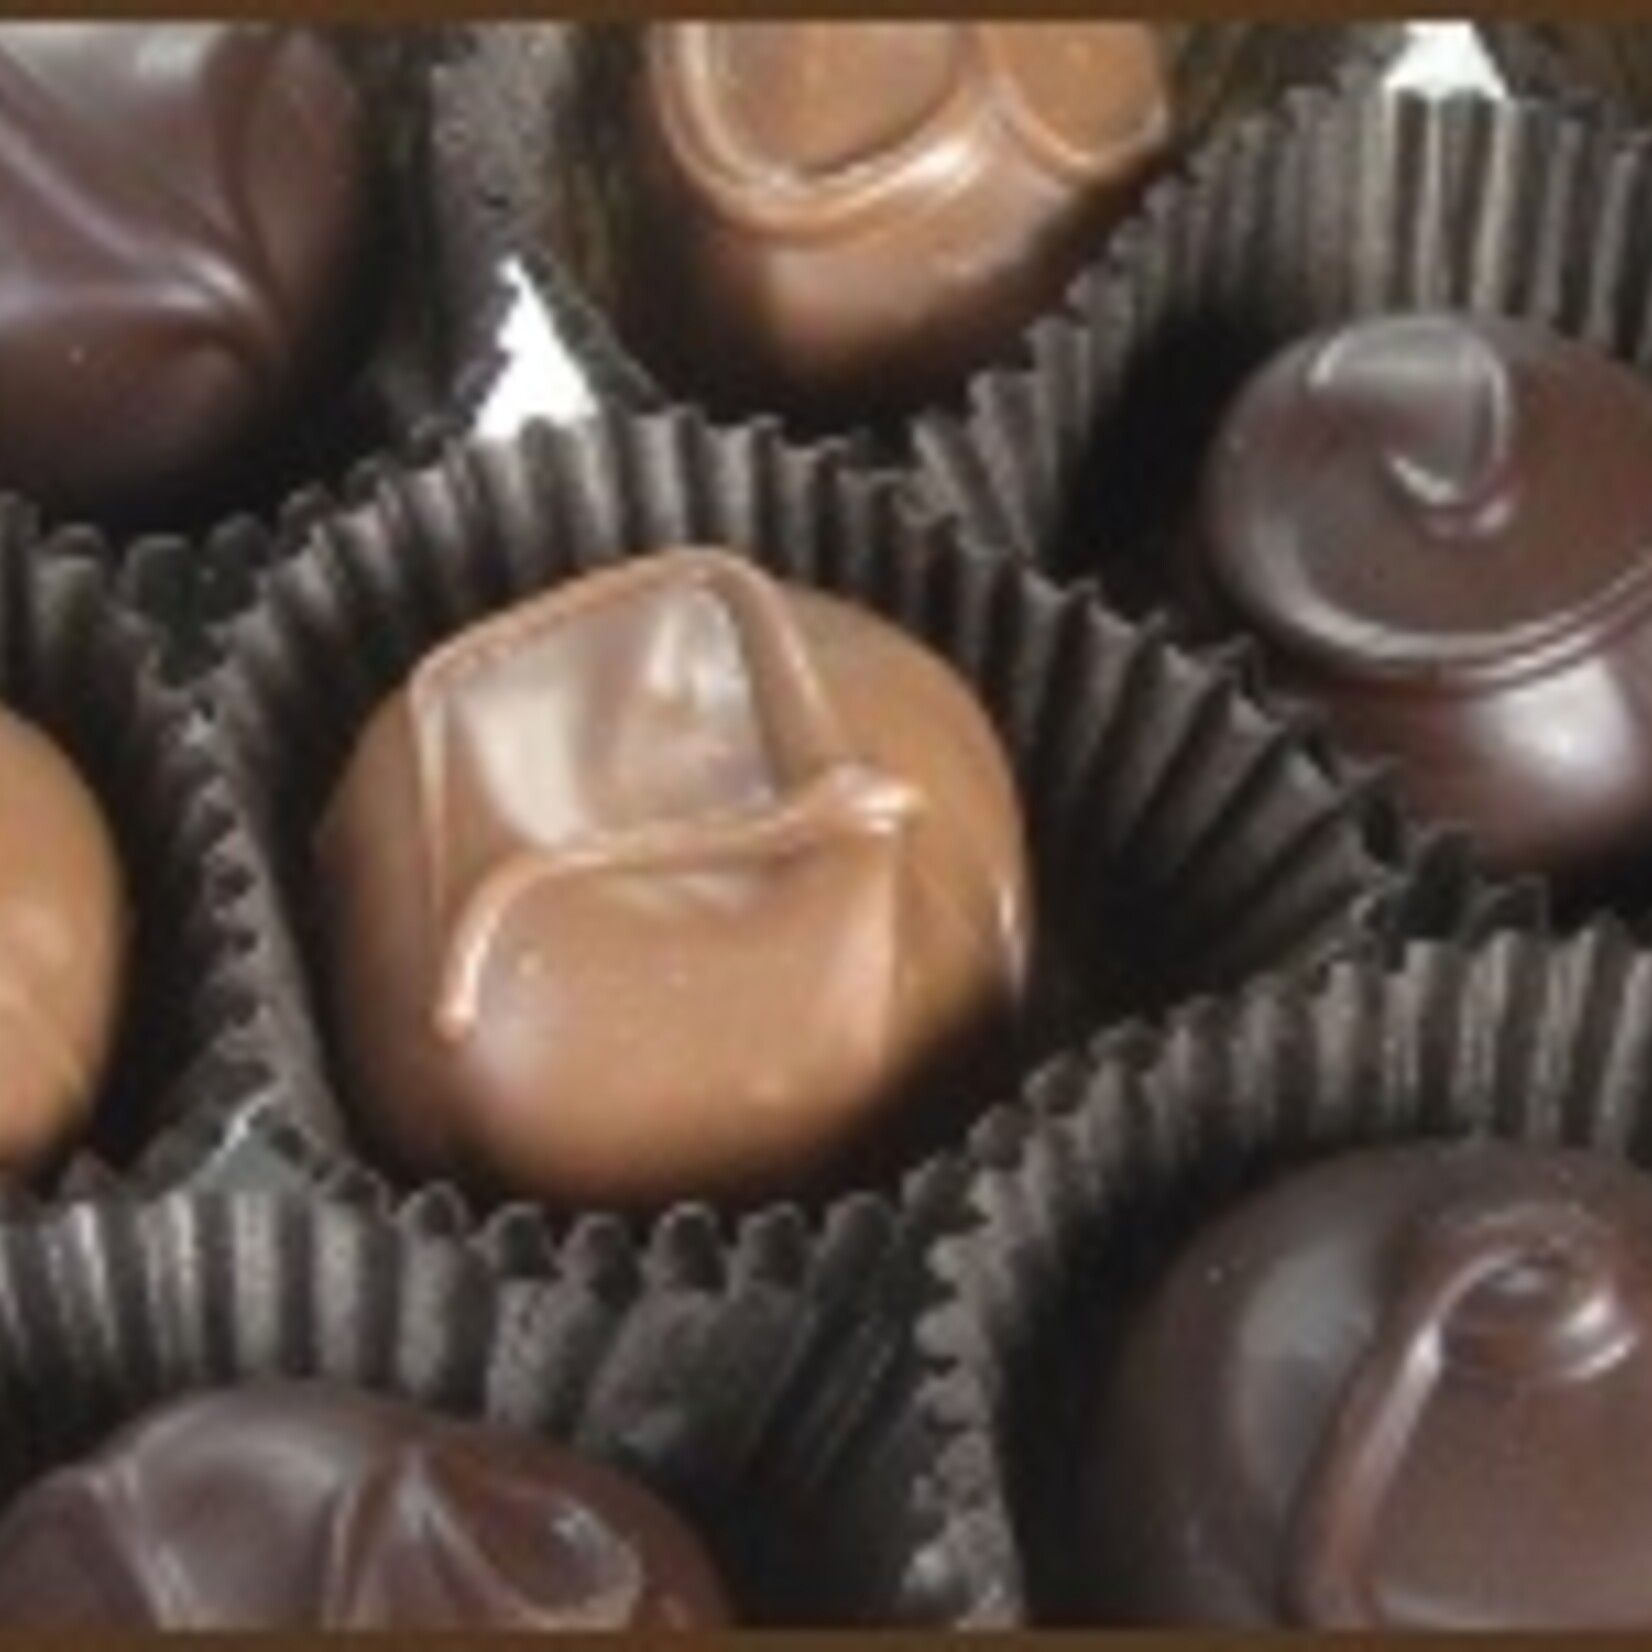 One Pound Chocolate covered Creams Gift Box